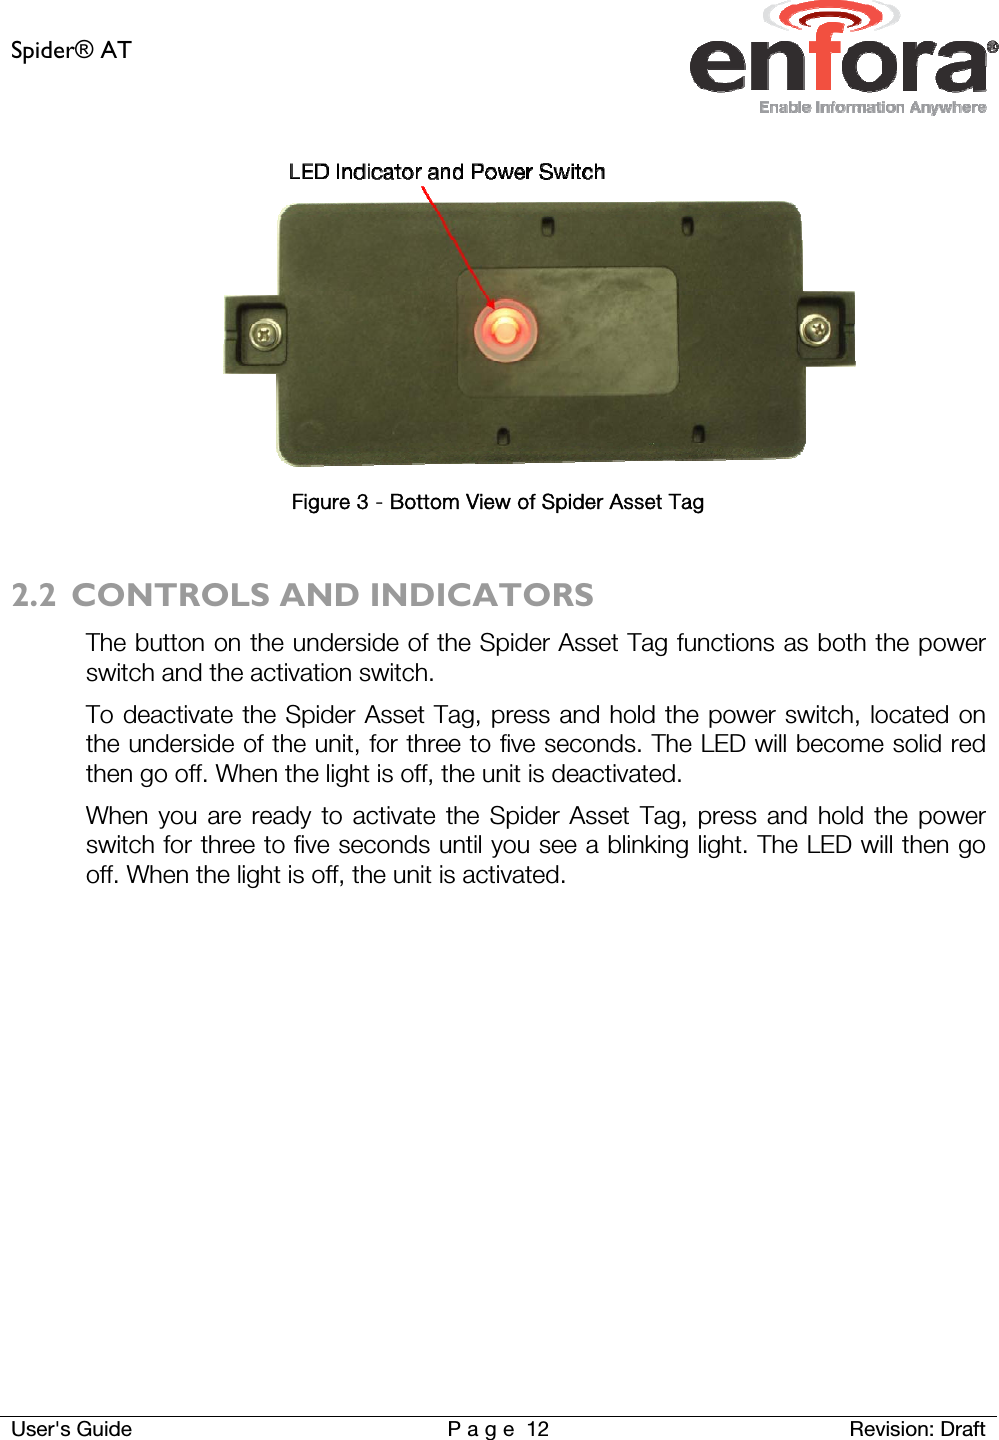 Spider® AT     User&apos;s Guide  P a g e 12 Revision: Draft  Figure 3 - Bottom View of Spider Asset Tag  2.2 CONTROLS AND INDICATORS The button on the underside of the Spider Asset Tag functions as both the power switch and the activation switch.  To deactivate the Spider Asset Tag, press and hold the power switch, located on the underside of the unit, for three to five seconds. The LED will become solid red then go off. When the light is off, the unit is deactivated. When you are ready to activate the Spider Asset Tag, press and hold the power switch for three to five seconds until you see a blinking light. The LED will then go off. When the light is off, the unit is activated.    